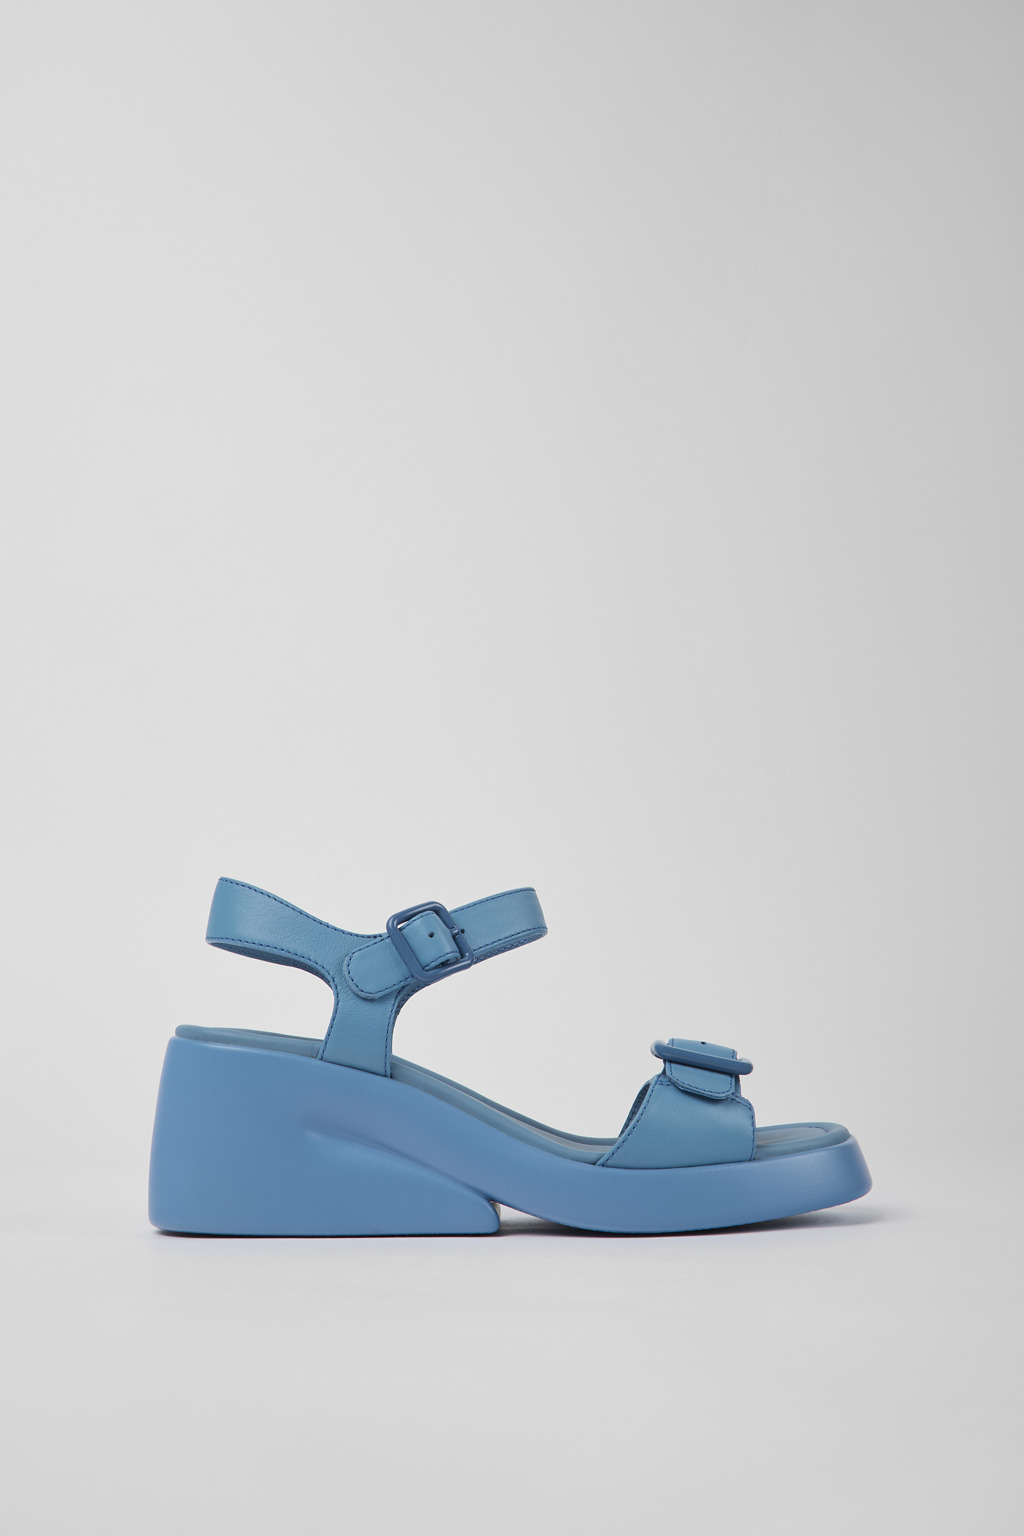 Kaah Blue Sandals for Women - Fall/Winter collection - Camper USA